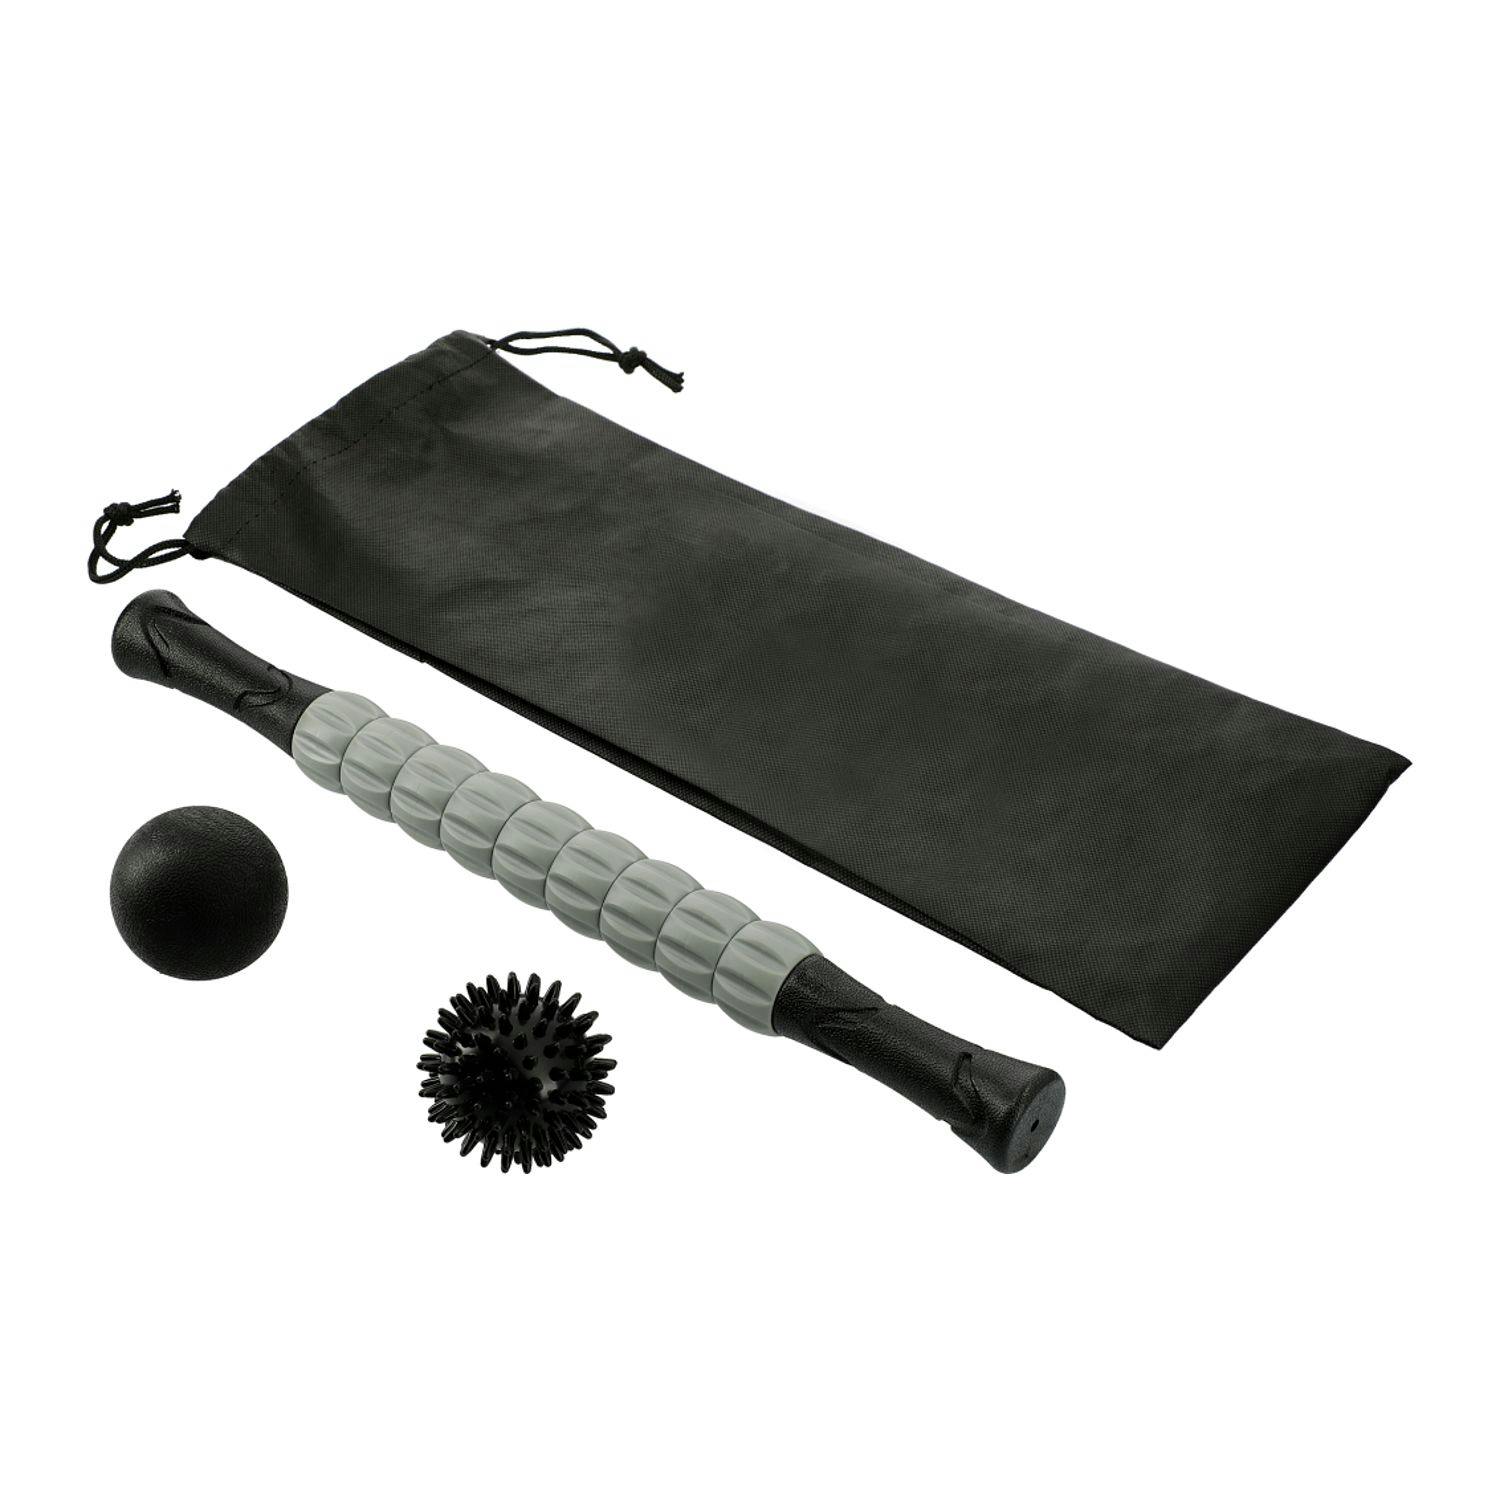 Oasis 3 Piece Massage and Recovery Kit - additional Image 1